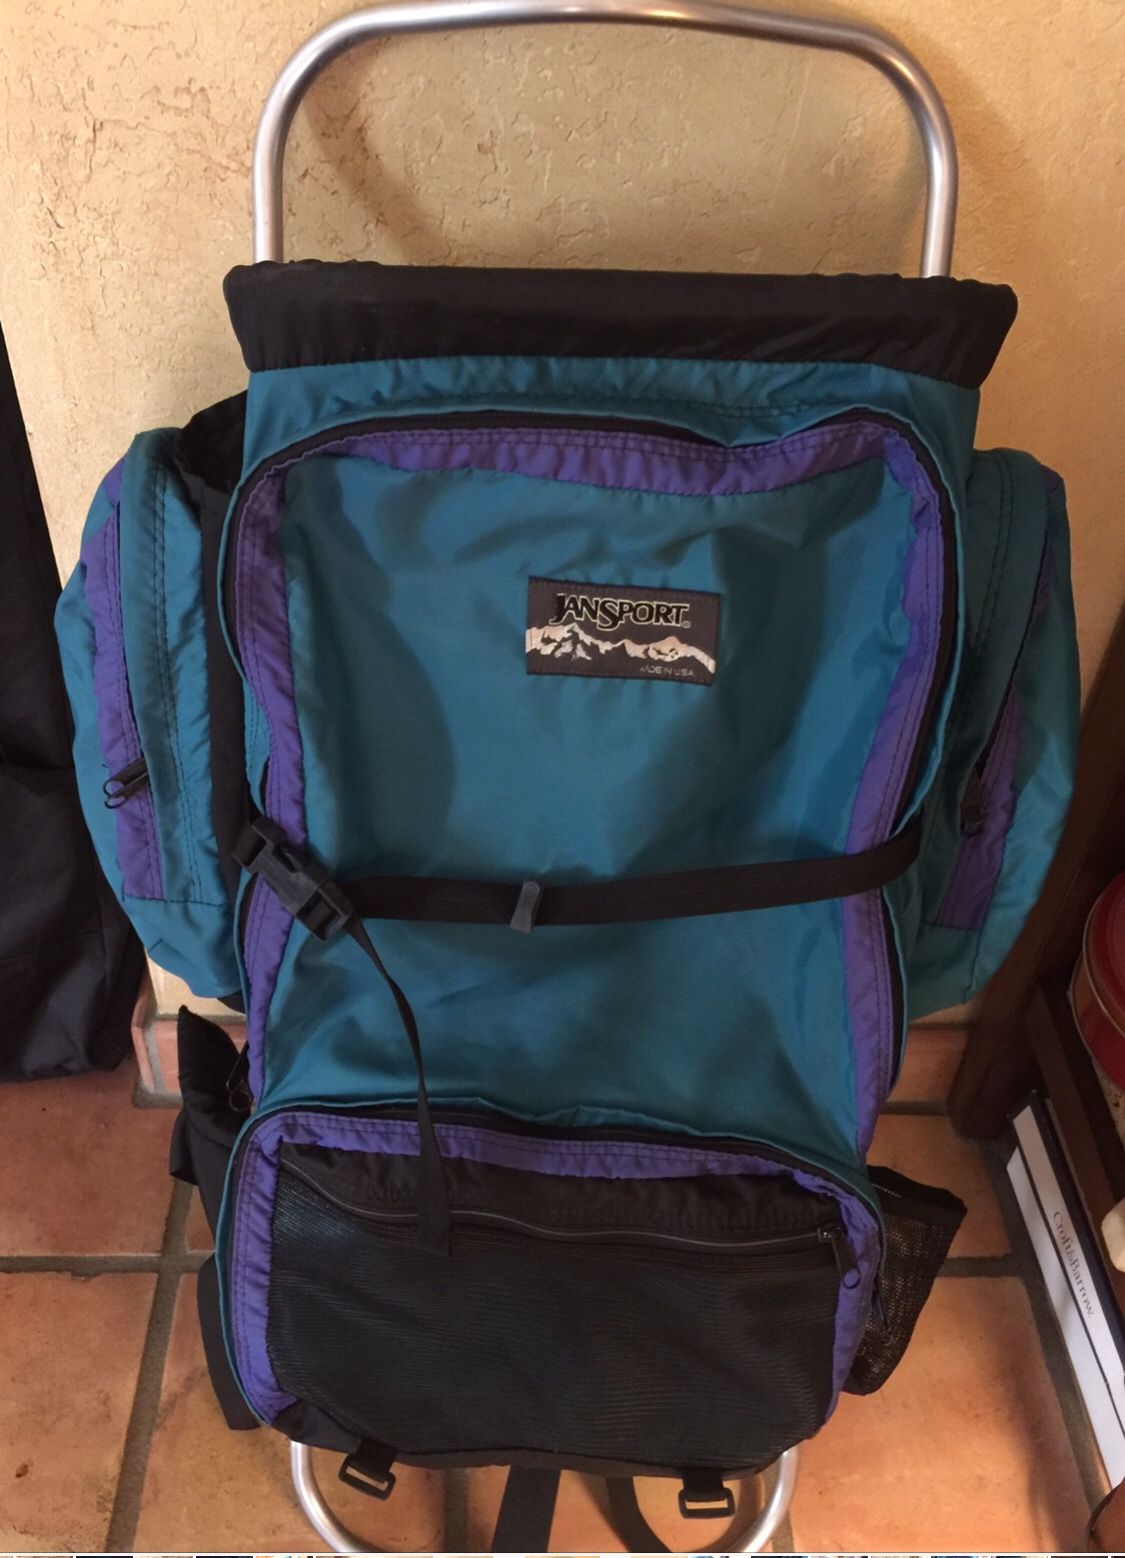 JANSPORT-Hiking Backpack w/ External Aluminum Metal Frame, w/ Hip Wings, 38 inch Tall frame, Used-Good Condition, Washed & Cleaned, Made in USA